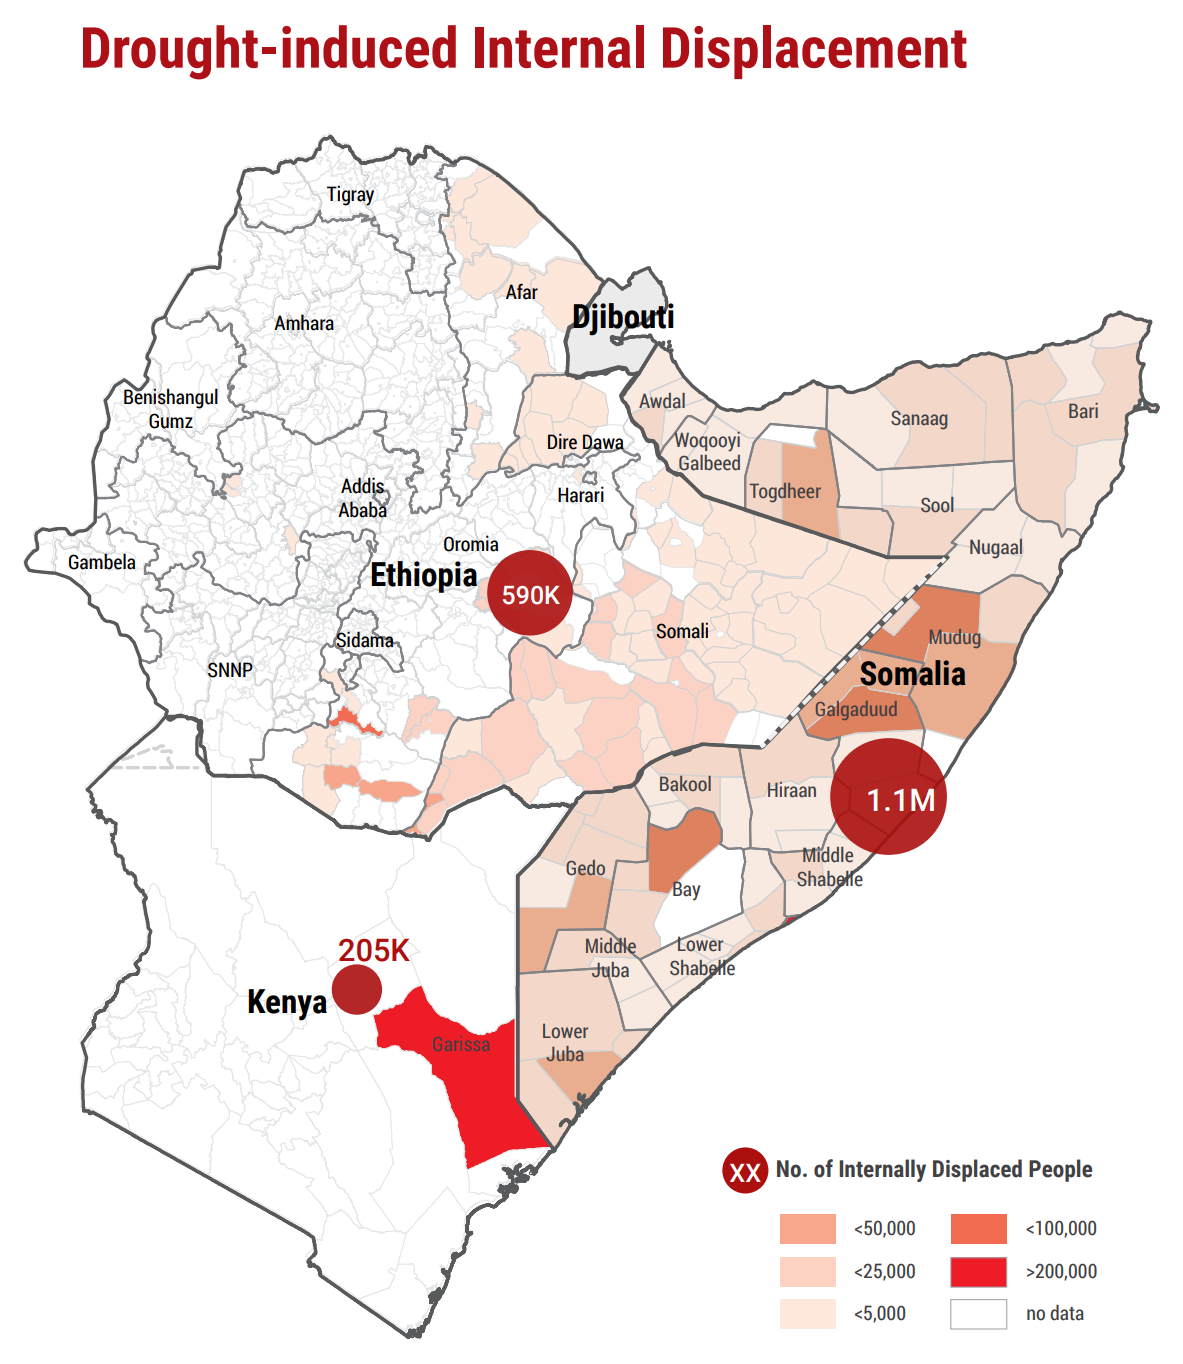 Map showing drought-induced internal displacement in the Horn of Africa in November 2022. Families are taking desperate measures to survive, with more than 2 million people leaving their homes in search of food, pasture, water and alternative livelihoods, increasing the risk of inter-communal conflict, as well as heightening pressure on already limited basic services. Since January 2021, about 1.27 million people in Somalia have been displaced: some have migrated to near-by towns, joining existing camps for internally displaced people, while others have crossed borders seeking support or traversed dangerous distances controlled by armed groups and contaminated with explosives in search of work or humanitarian assistance. Graphic: OCHA